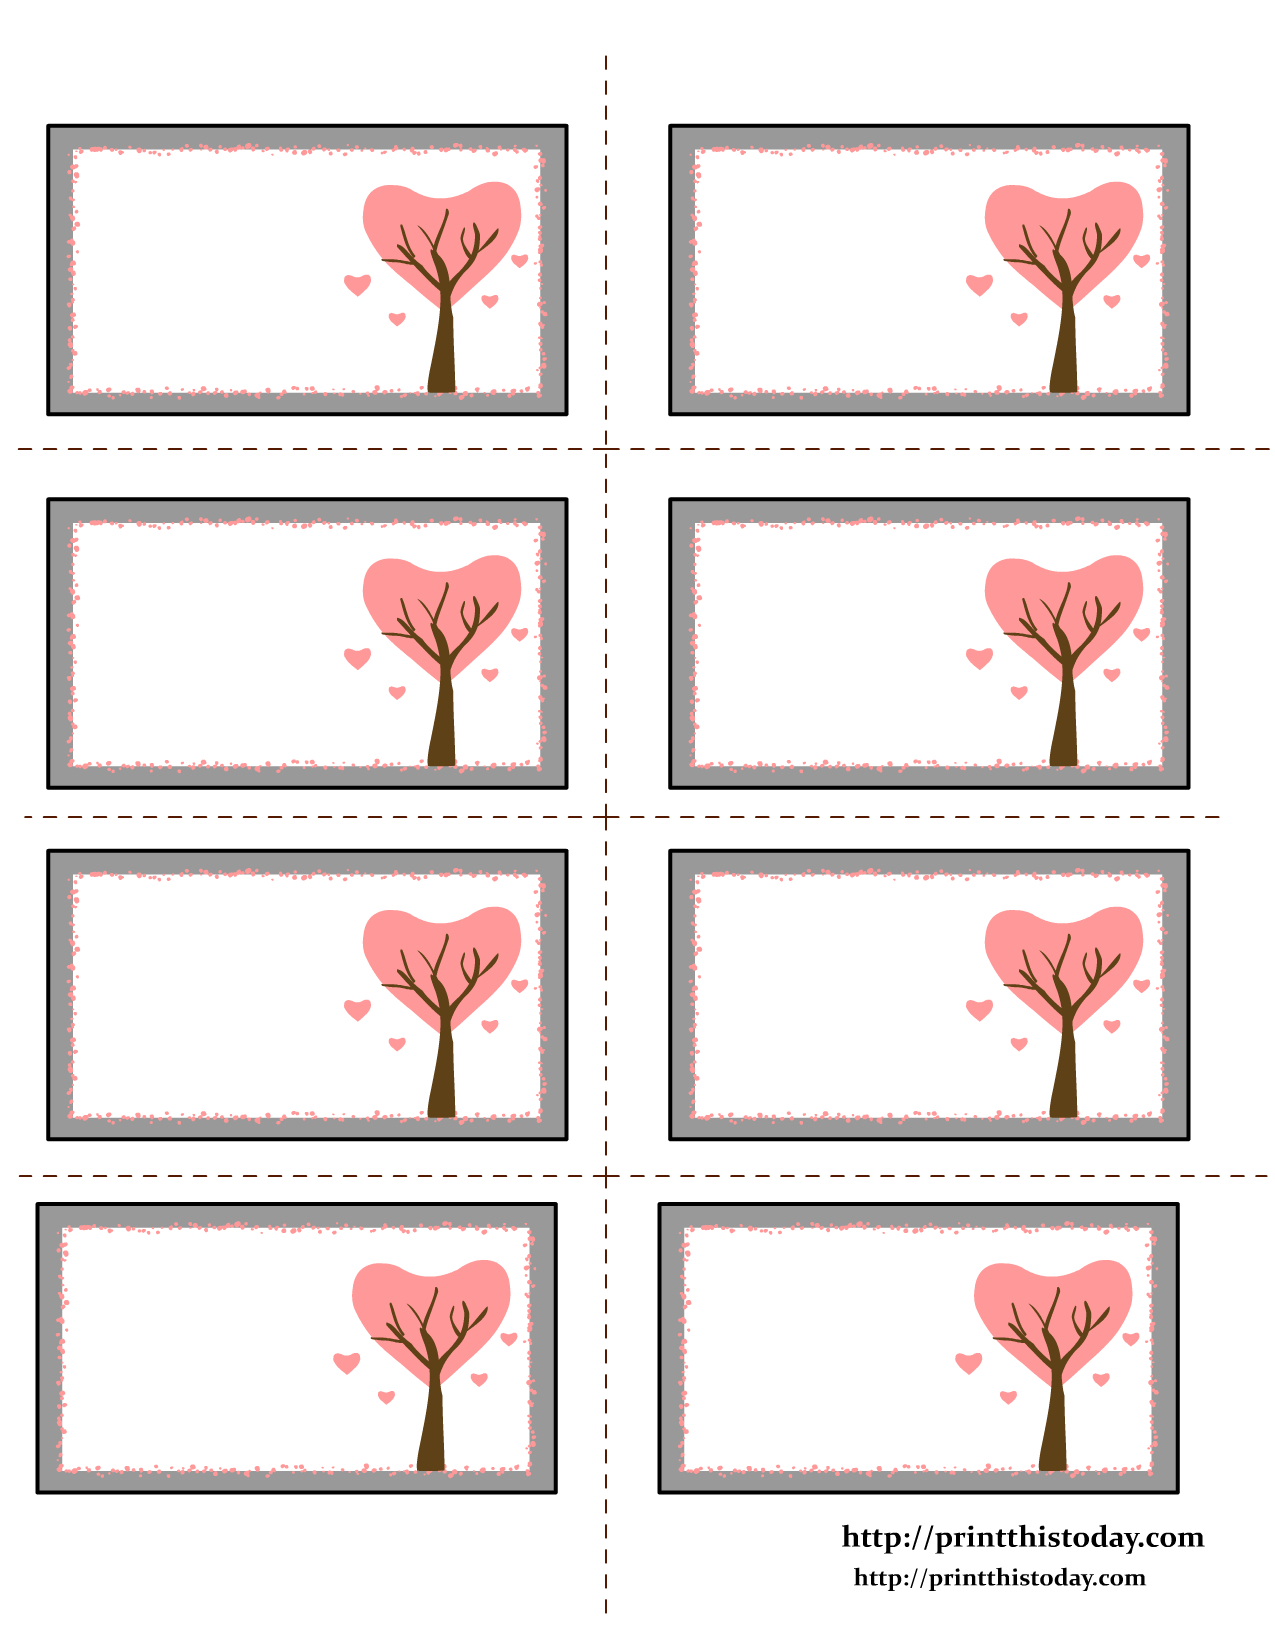 Etiquettes Imprimables | Valentine Labels With Love Birds On Tree - Free Printable Heart Labels